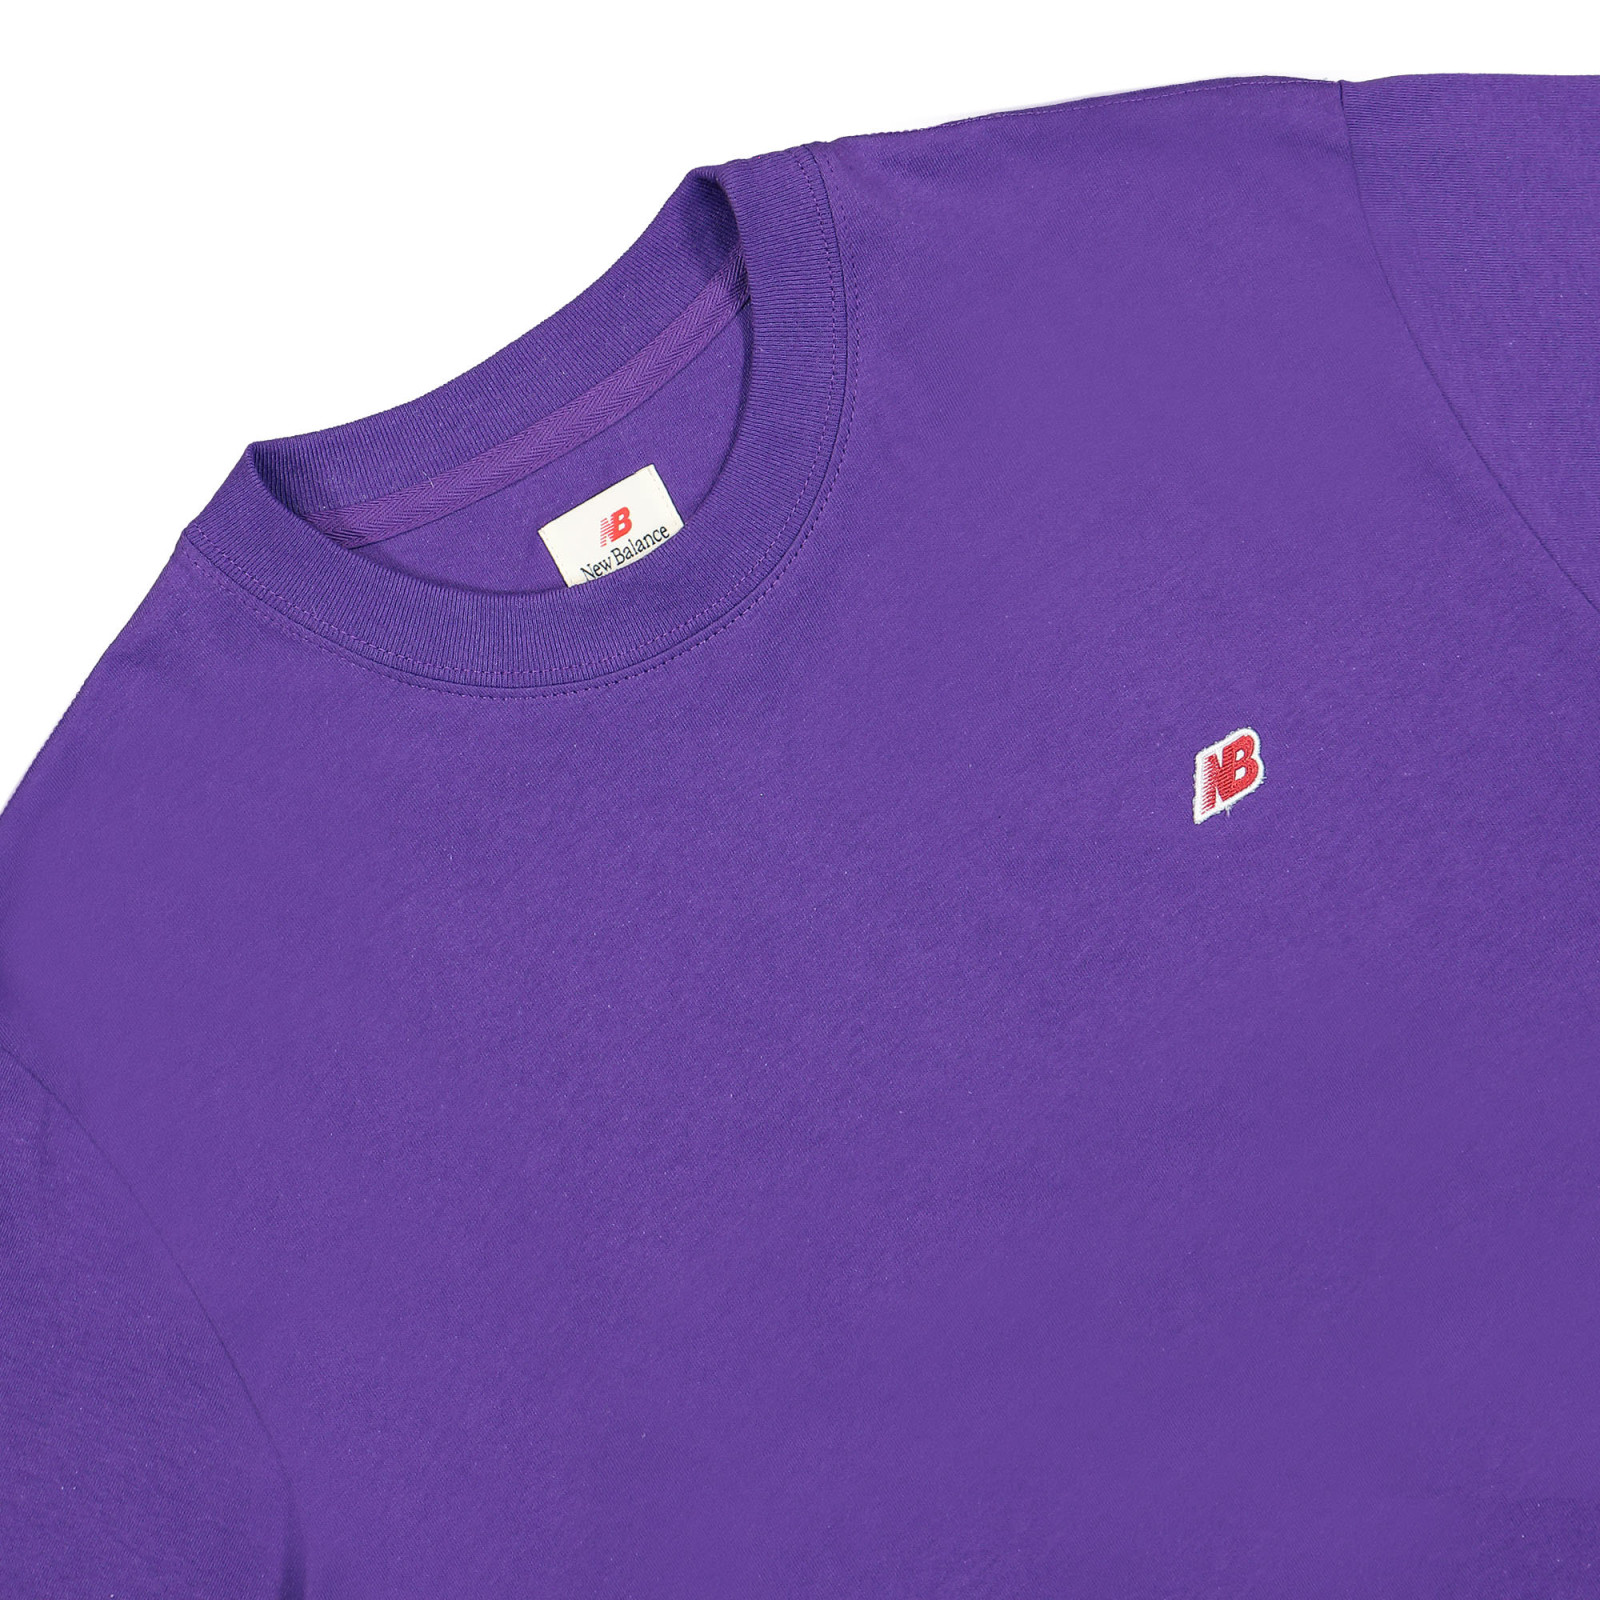 New Balance Made In USA
Core SS Tee
Prism Purple